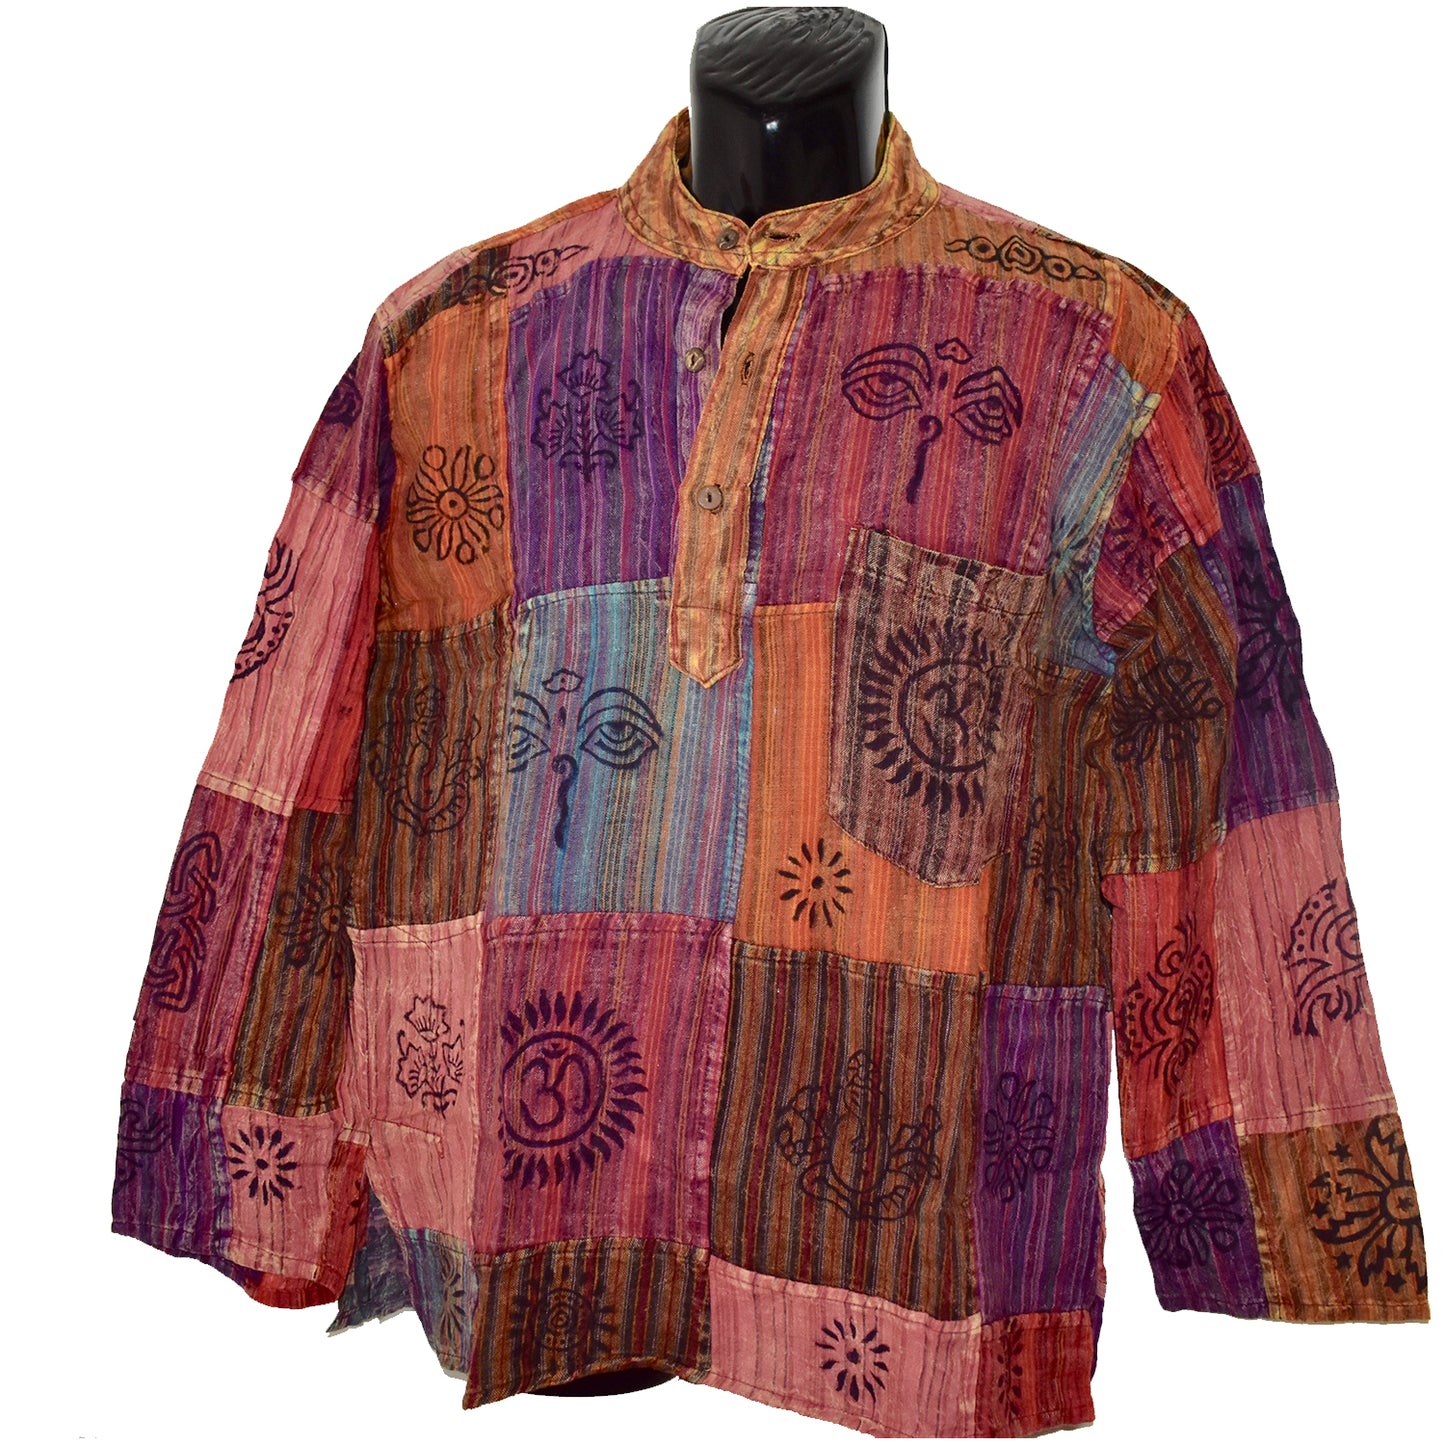 Ganesha Handicrafts, Nepalese Patchwork Long Sleeve, Long Sleeve, Men's and Women's  Long Sleeve, Nepalese Long Sleeve, Nepalese Patchwork Sleeve, Fashion for Men's and Women's  Sleeve. trending Sleeves. Red Colour Long Sleeve.